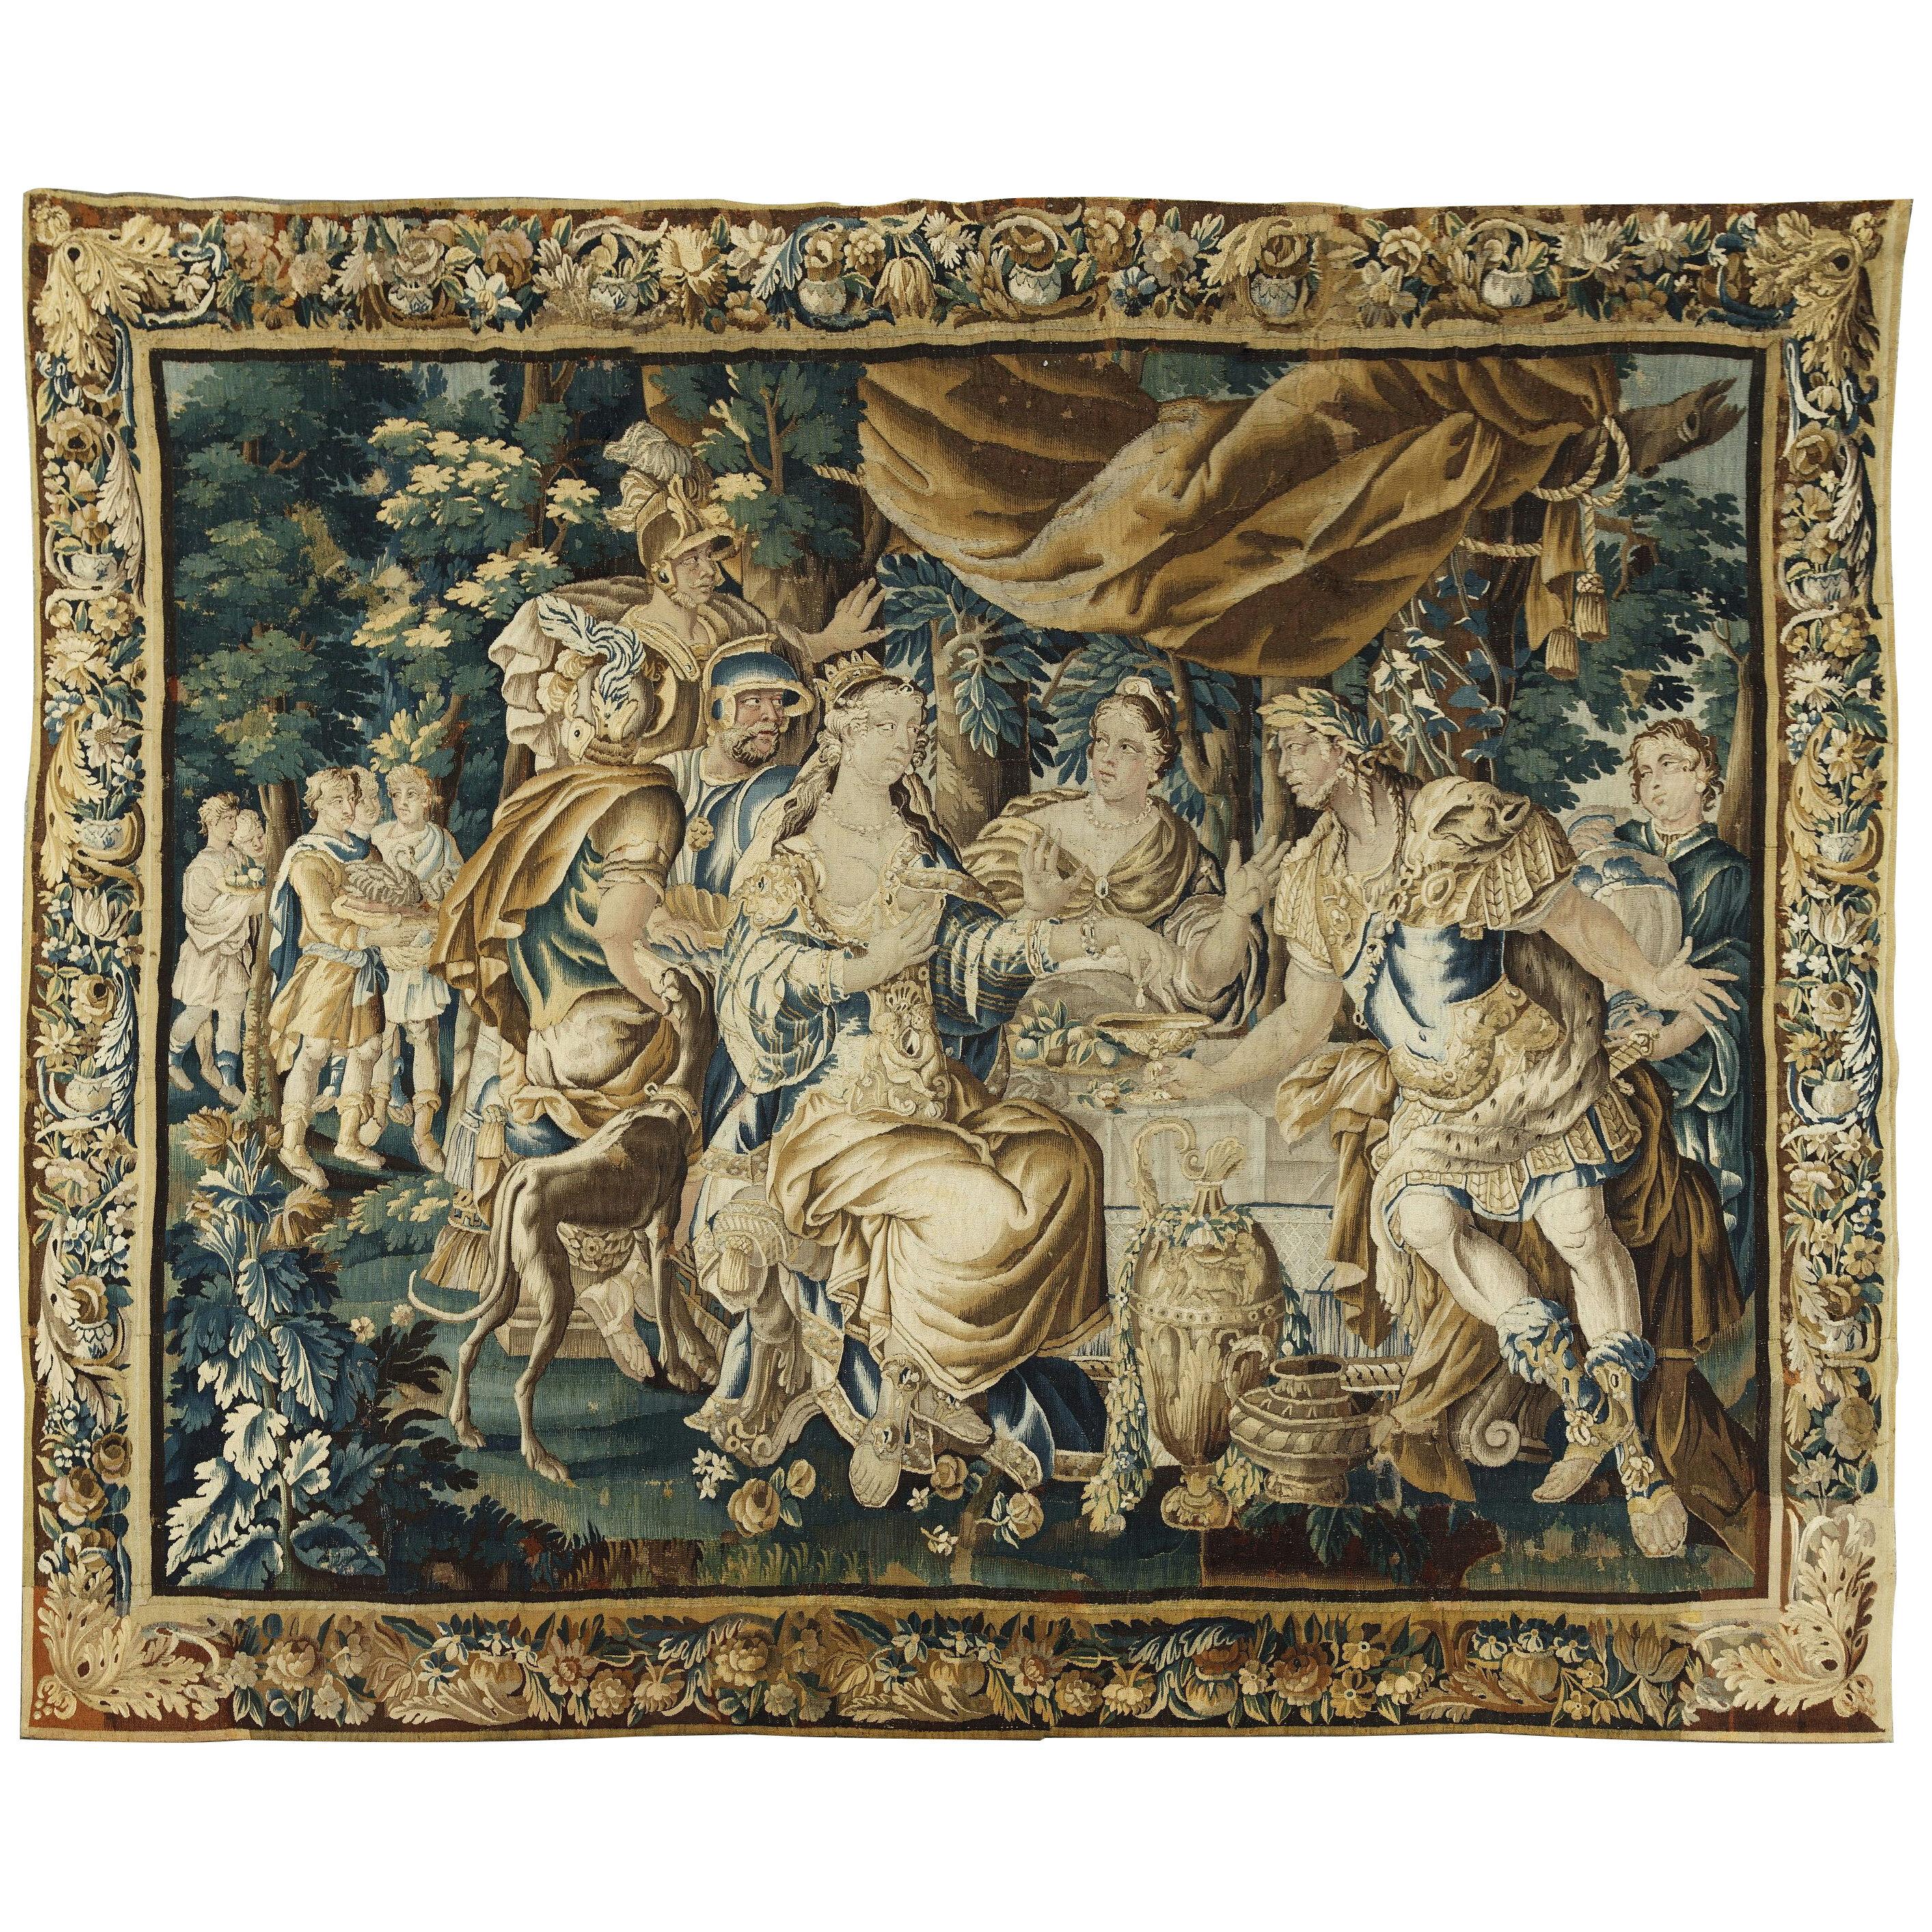 Aubusson Tapestry "The Banquet of Cleopatra", France, 18th Century